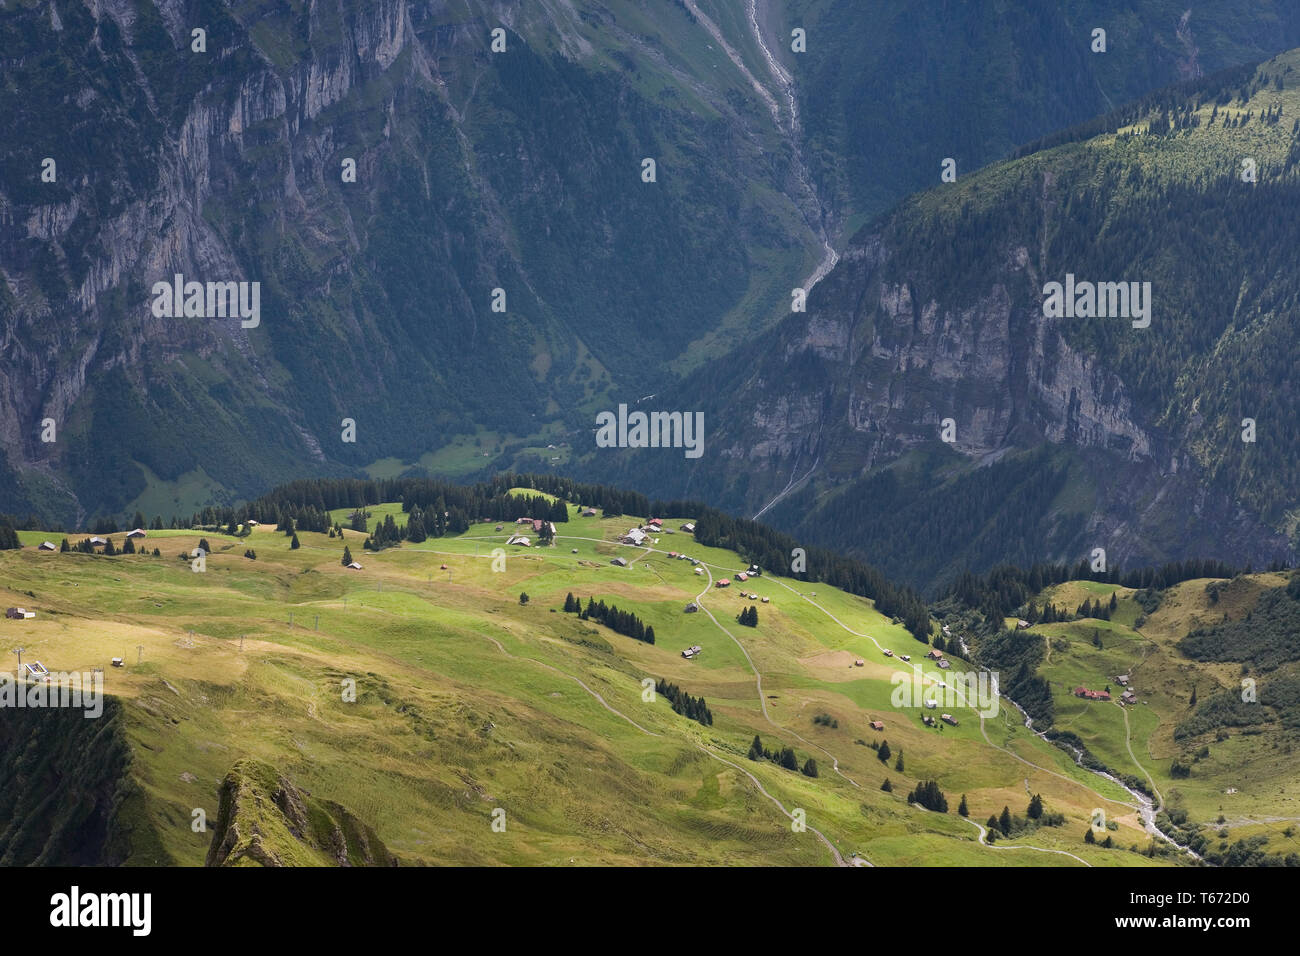 3 valleys: the Lauterbrunnental in the distance, the Sefinental below the cliff, and the Schilttal in the foreground, Bernese Oberland, Switzerland Stock Photo